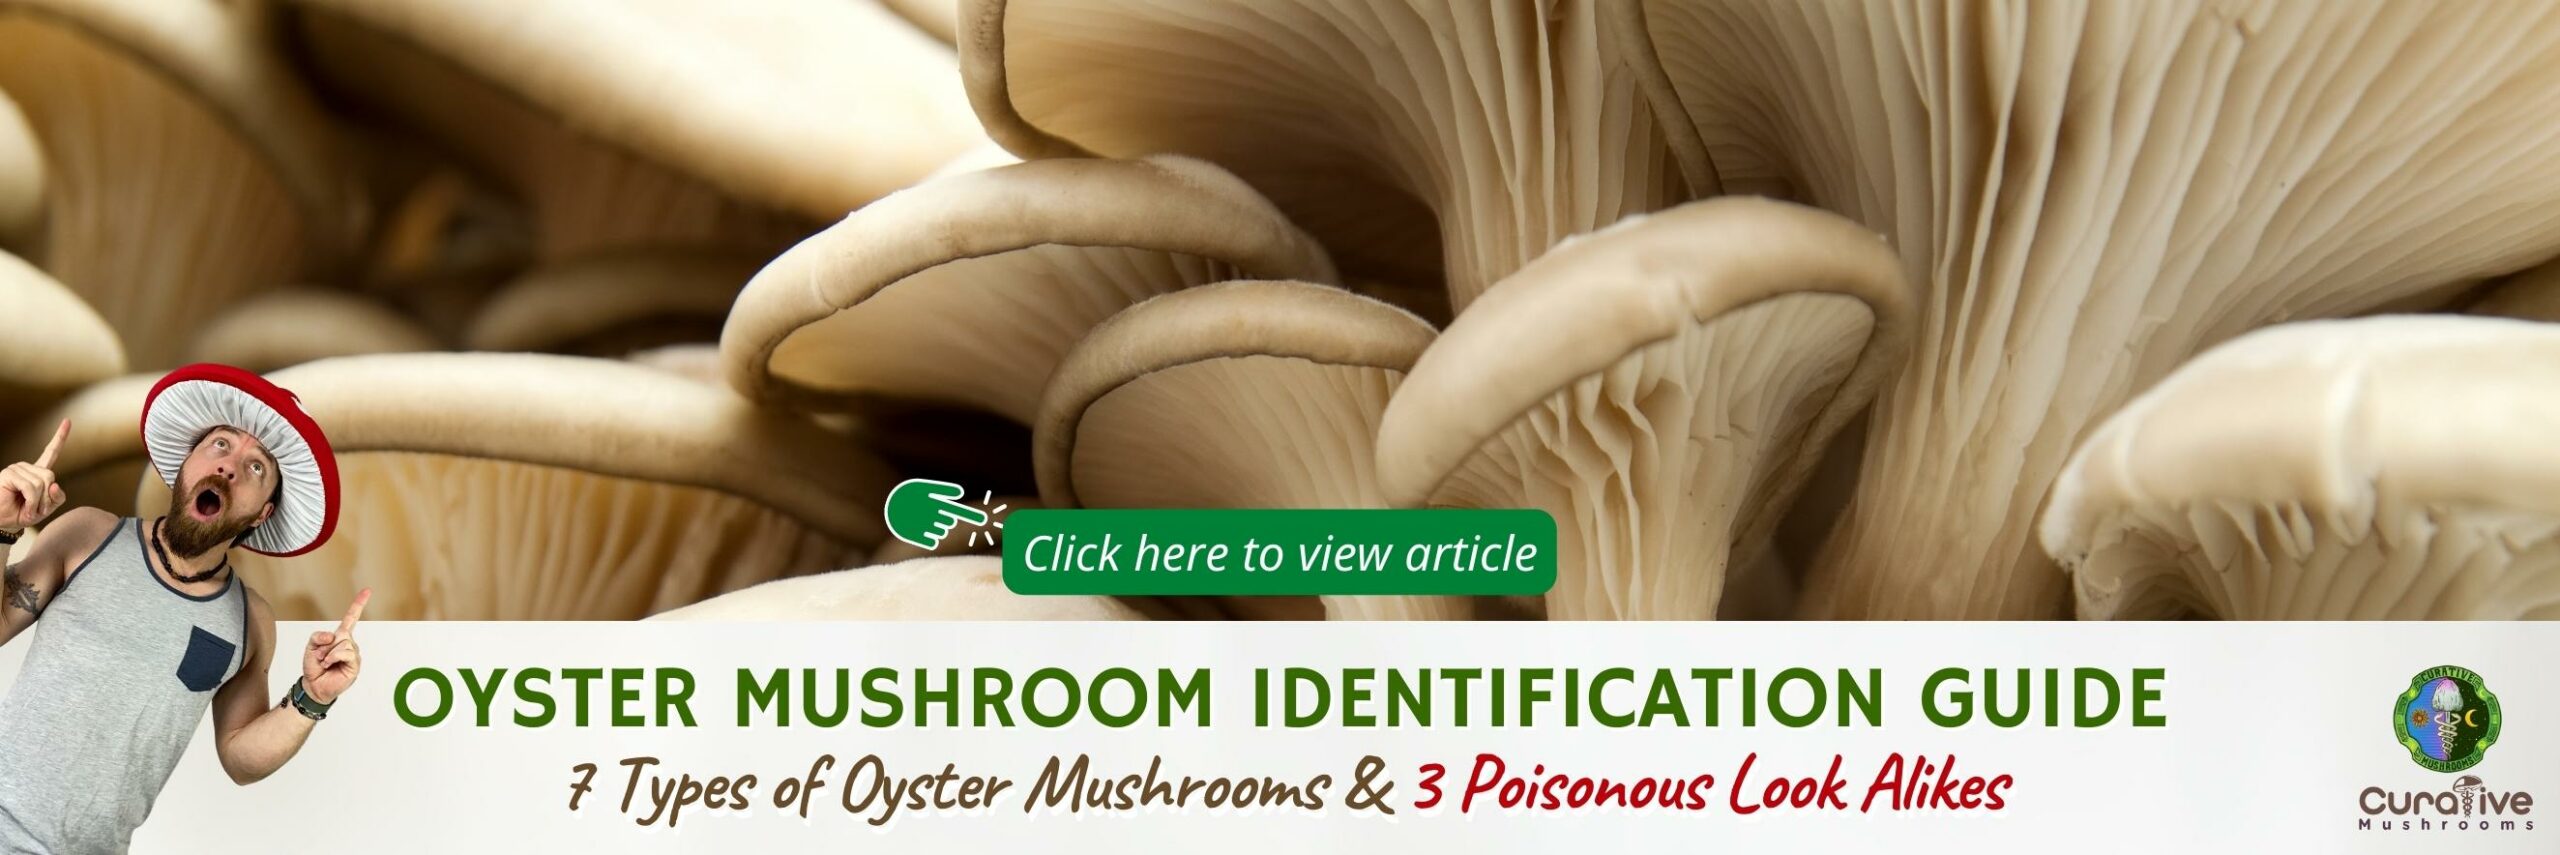 Oyster Mushroom Identification Guide - 7 Types of Oyster Mushrooms and 3 Poisonous Look Alikes